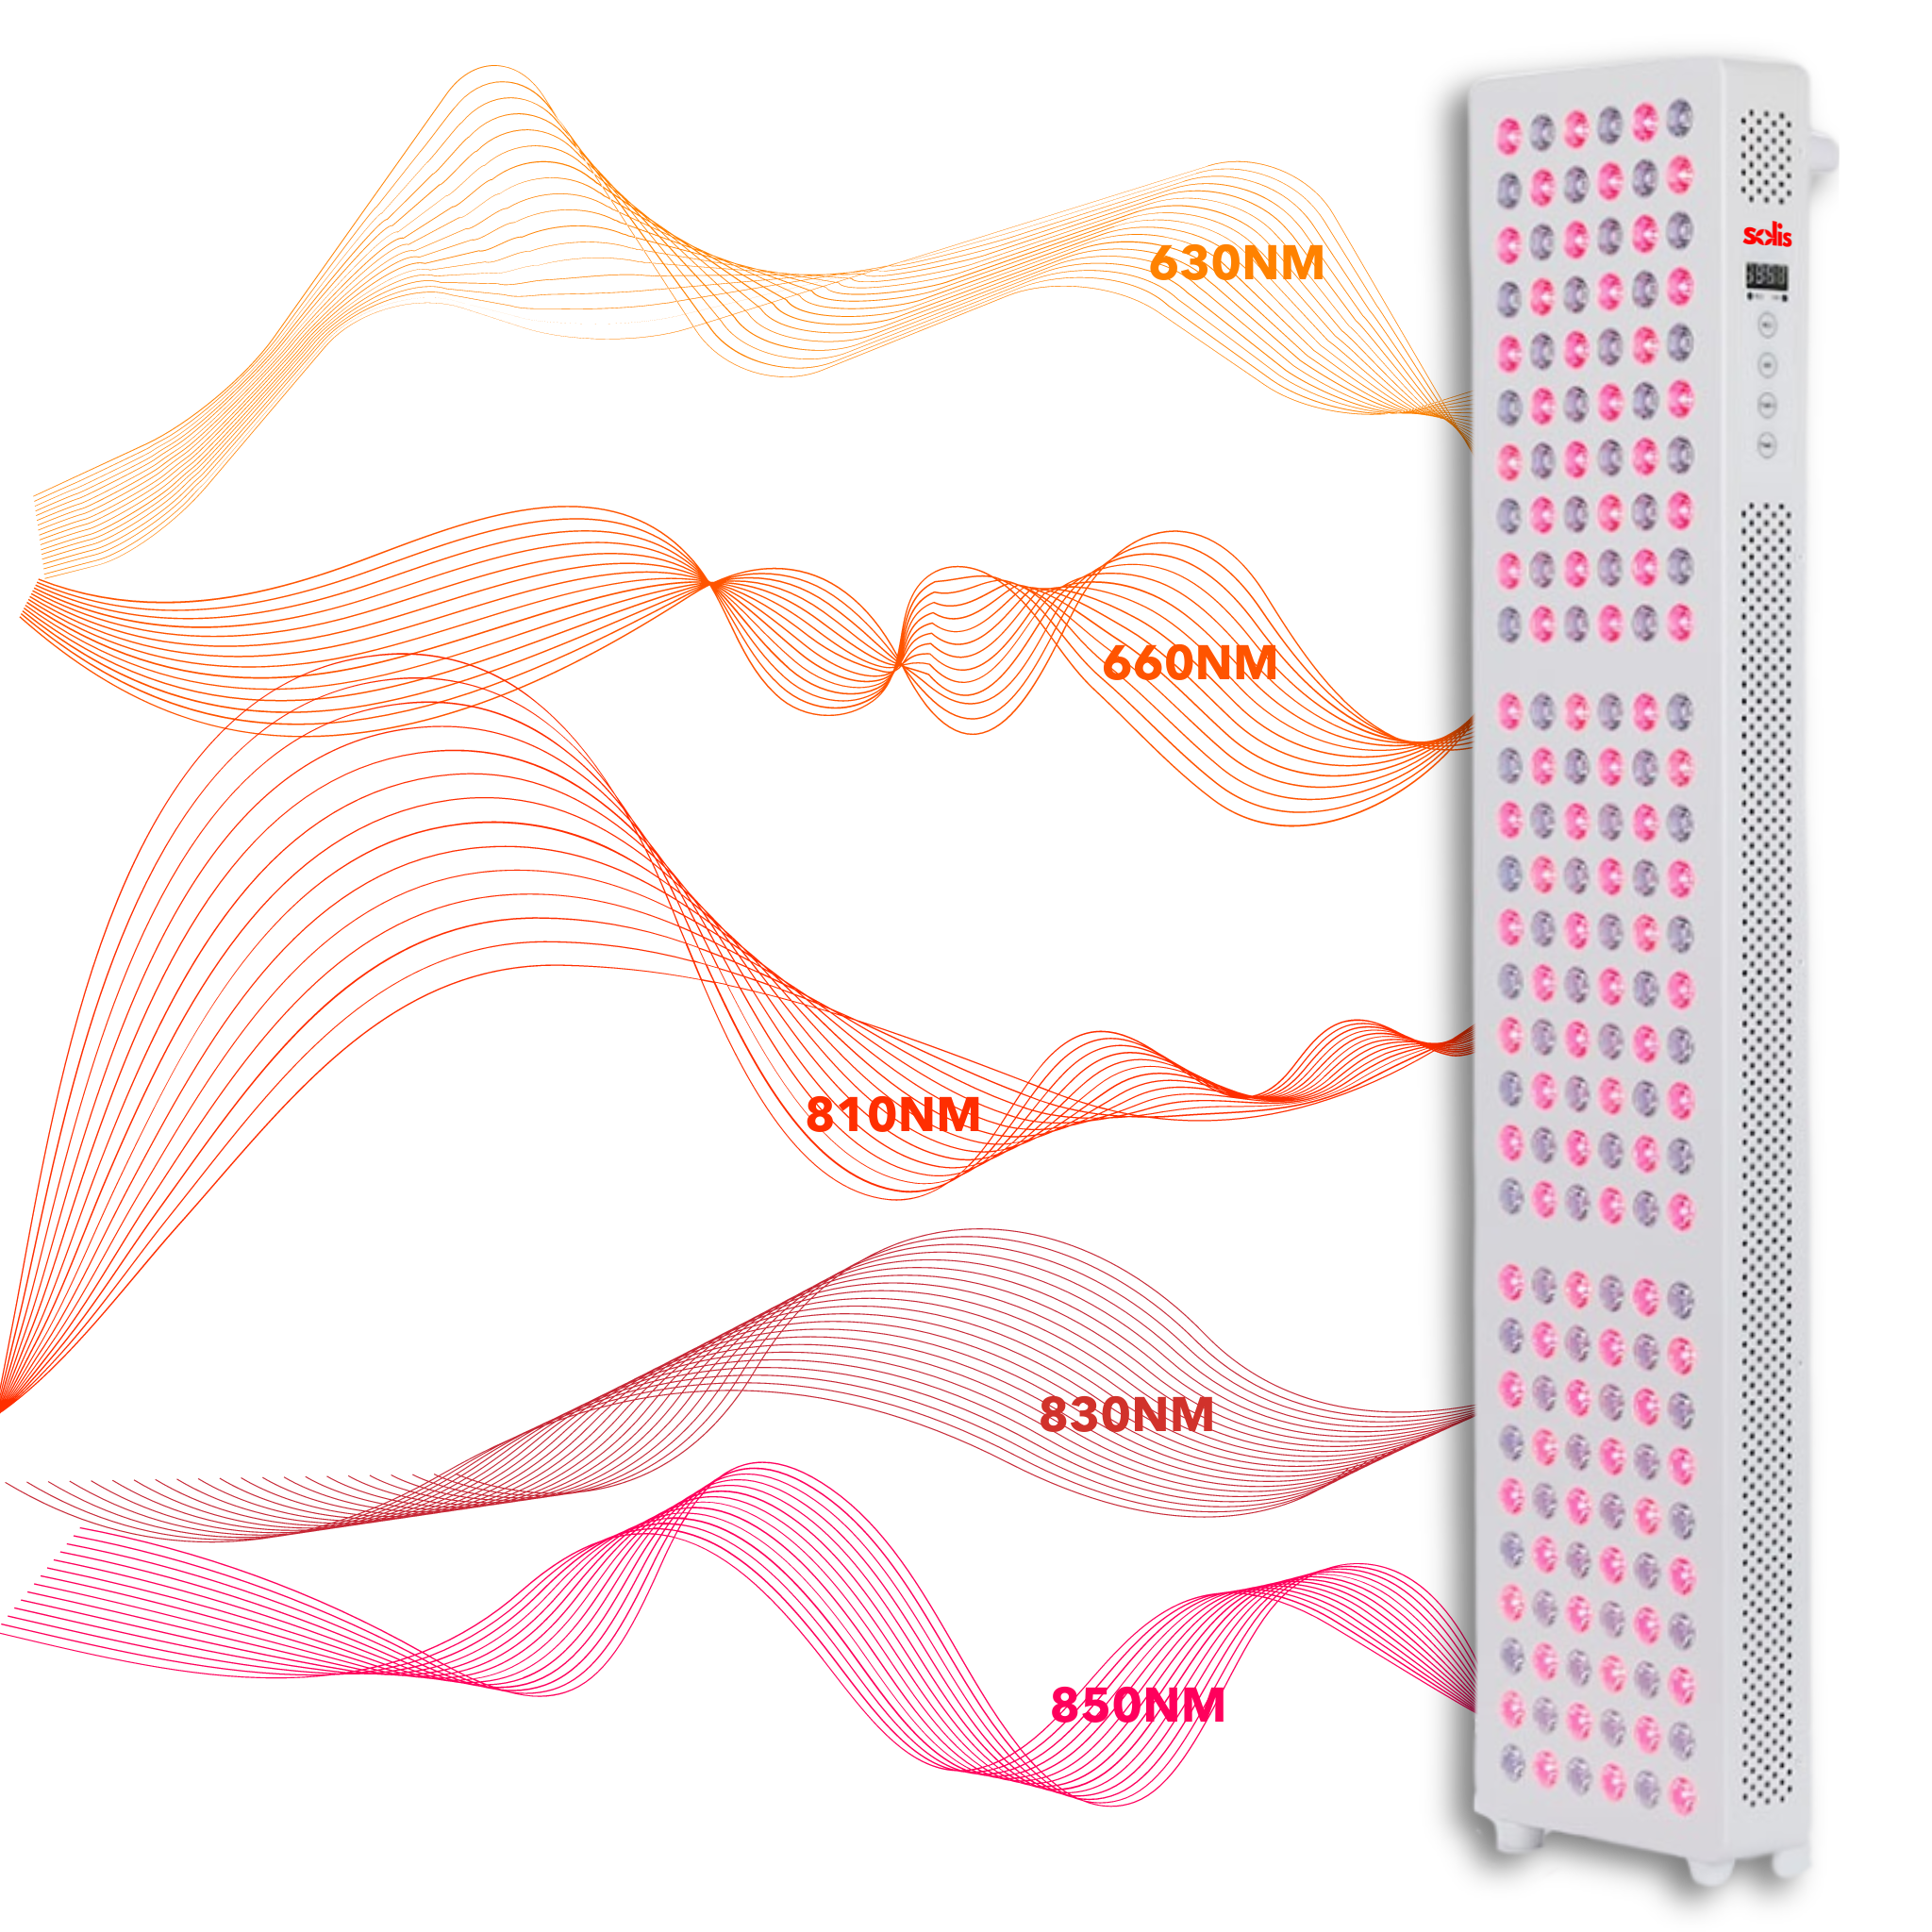 An LED light therapy device with illustrated light wavelengths in various colors.